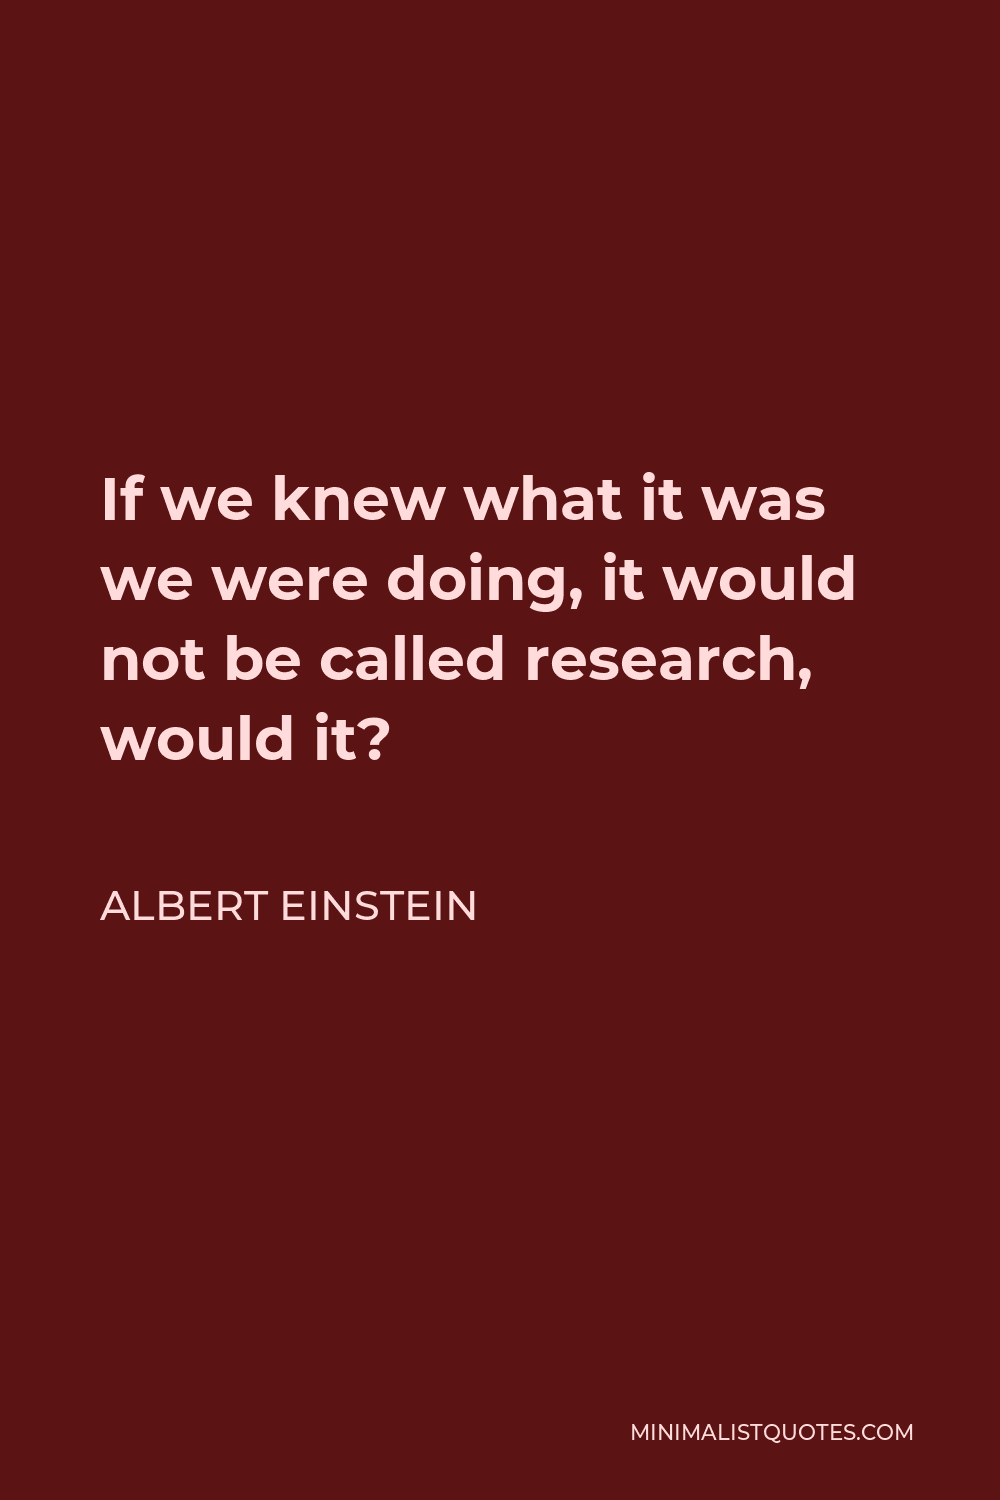 Albert Einstein Quote - If we knew what it was we were doing, it would not be called research, would it?